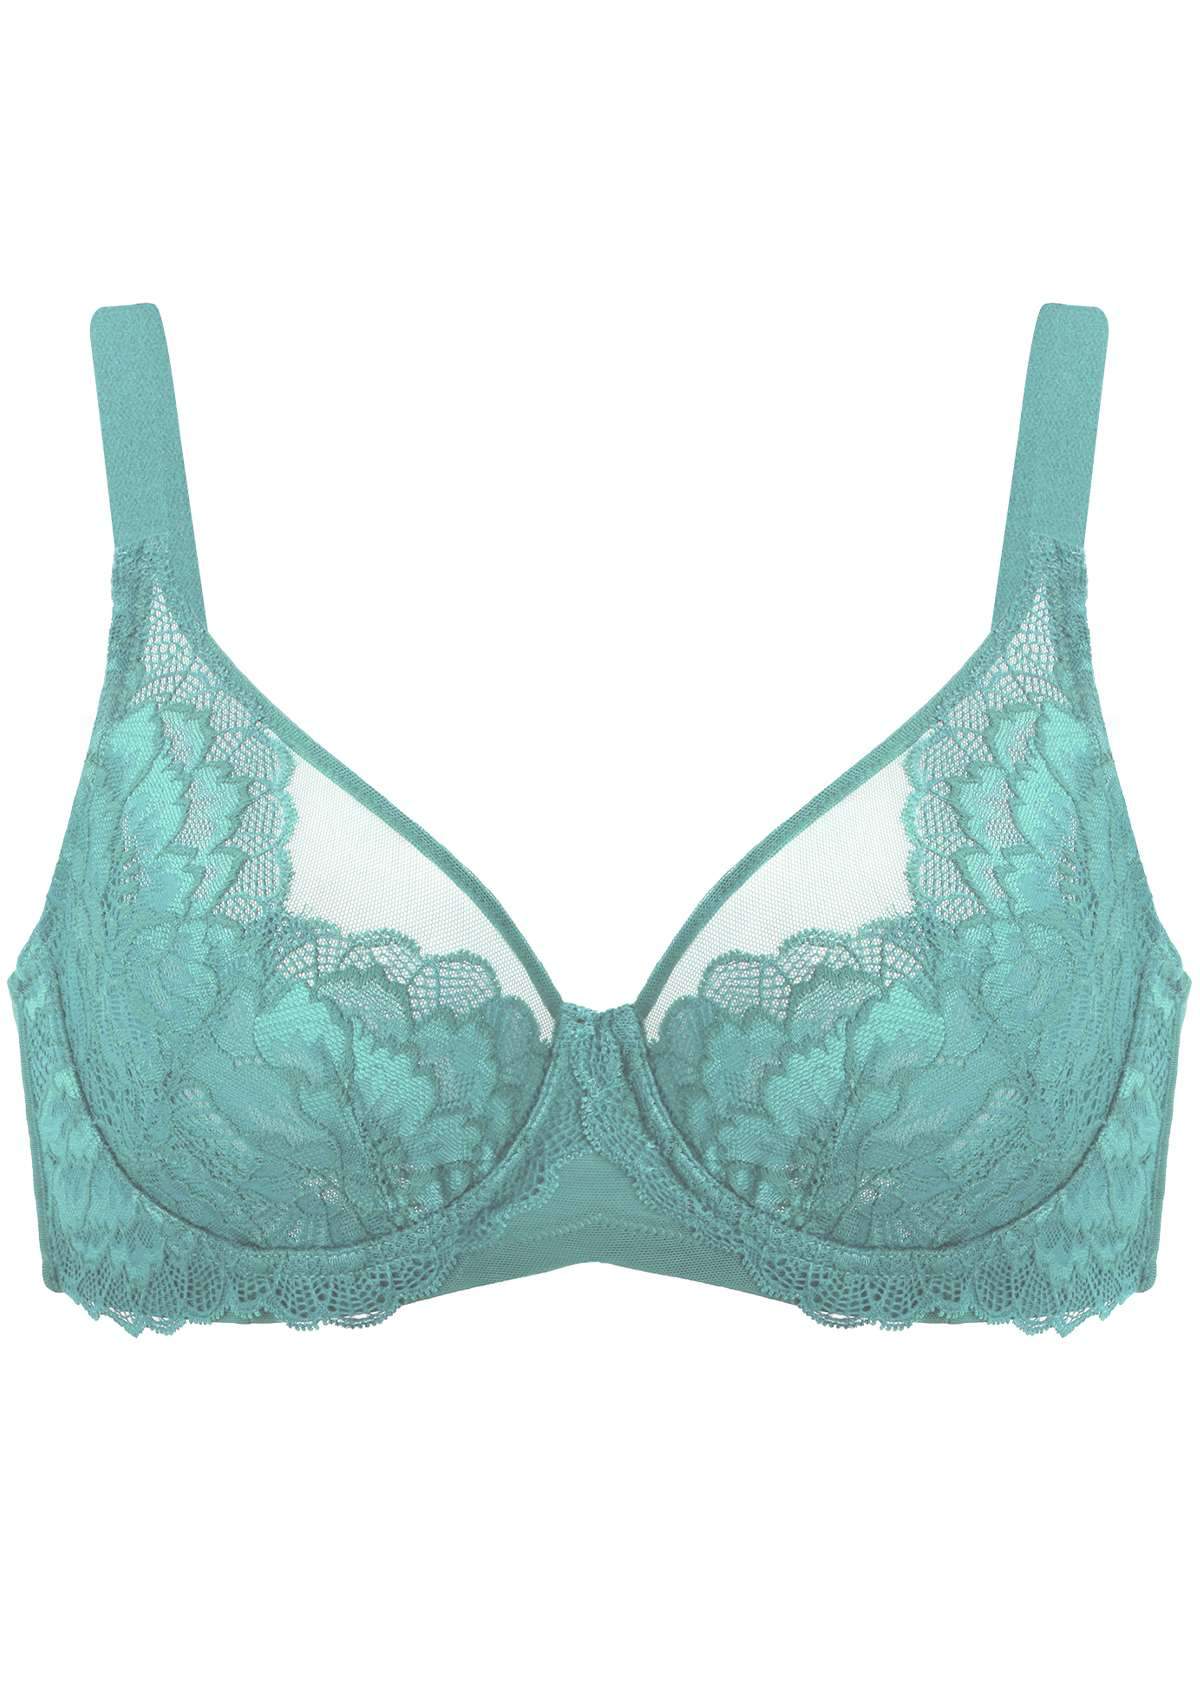 HSIA Peony Lace Unlined Supportive Underwire Bra - Light Coral / 38 / C